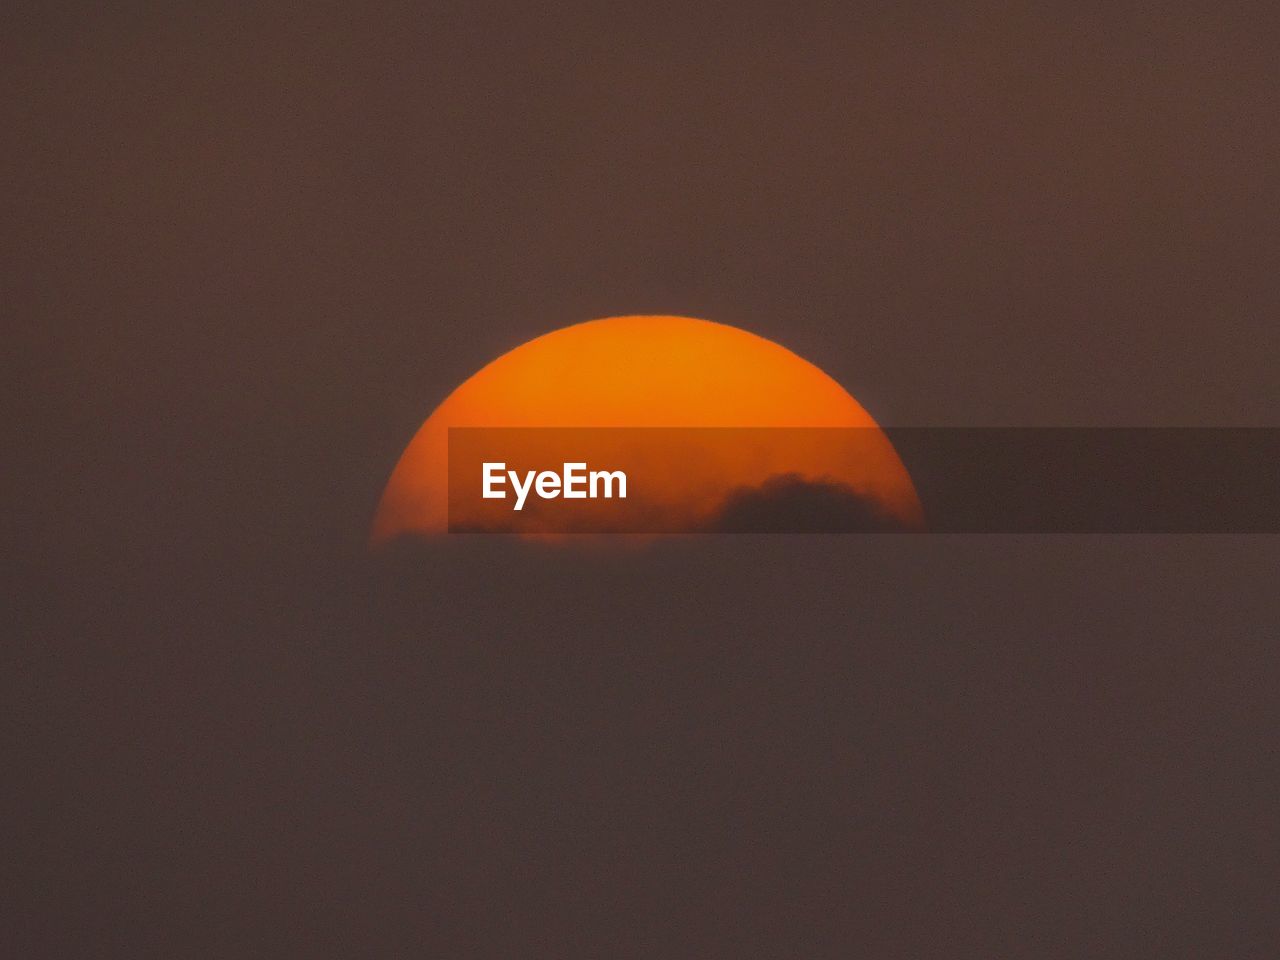 SCENIC VIEW OF MOON AT SUNSET